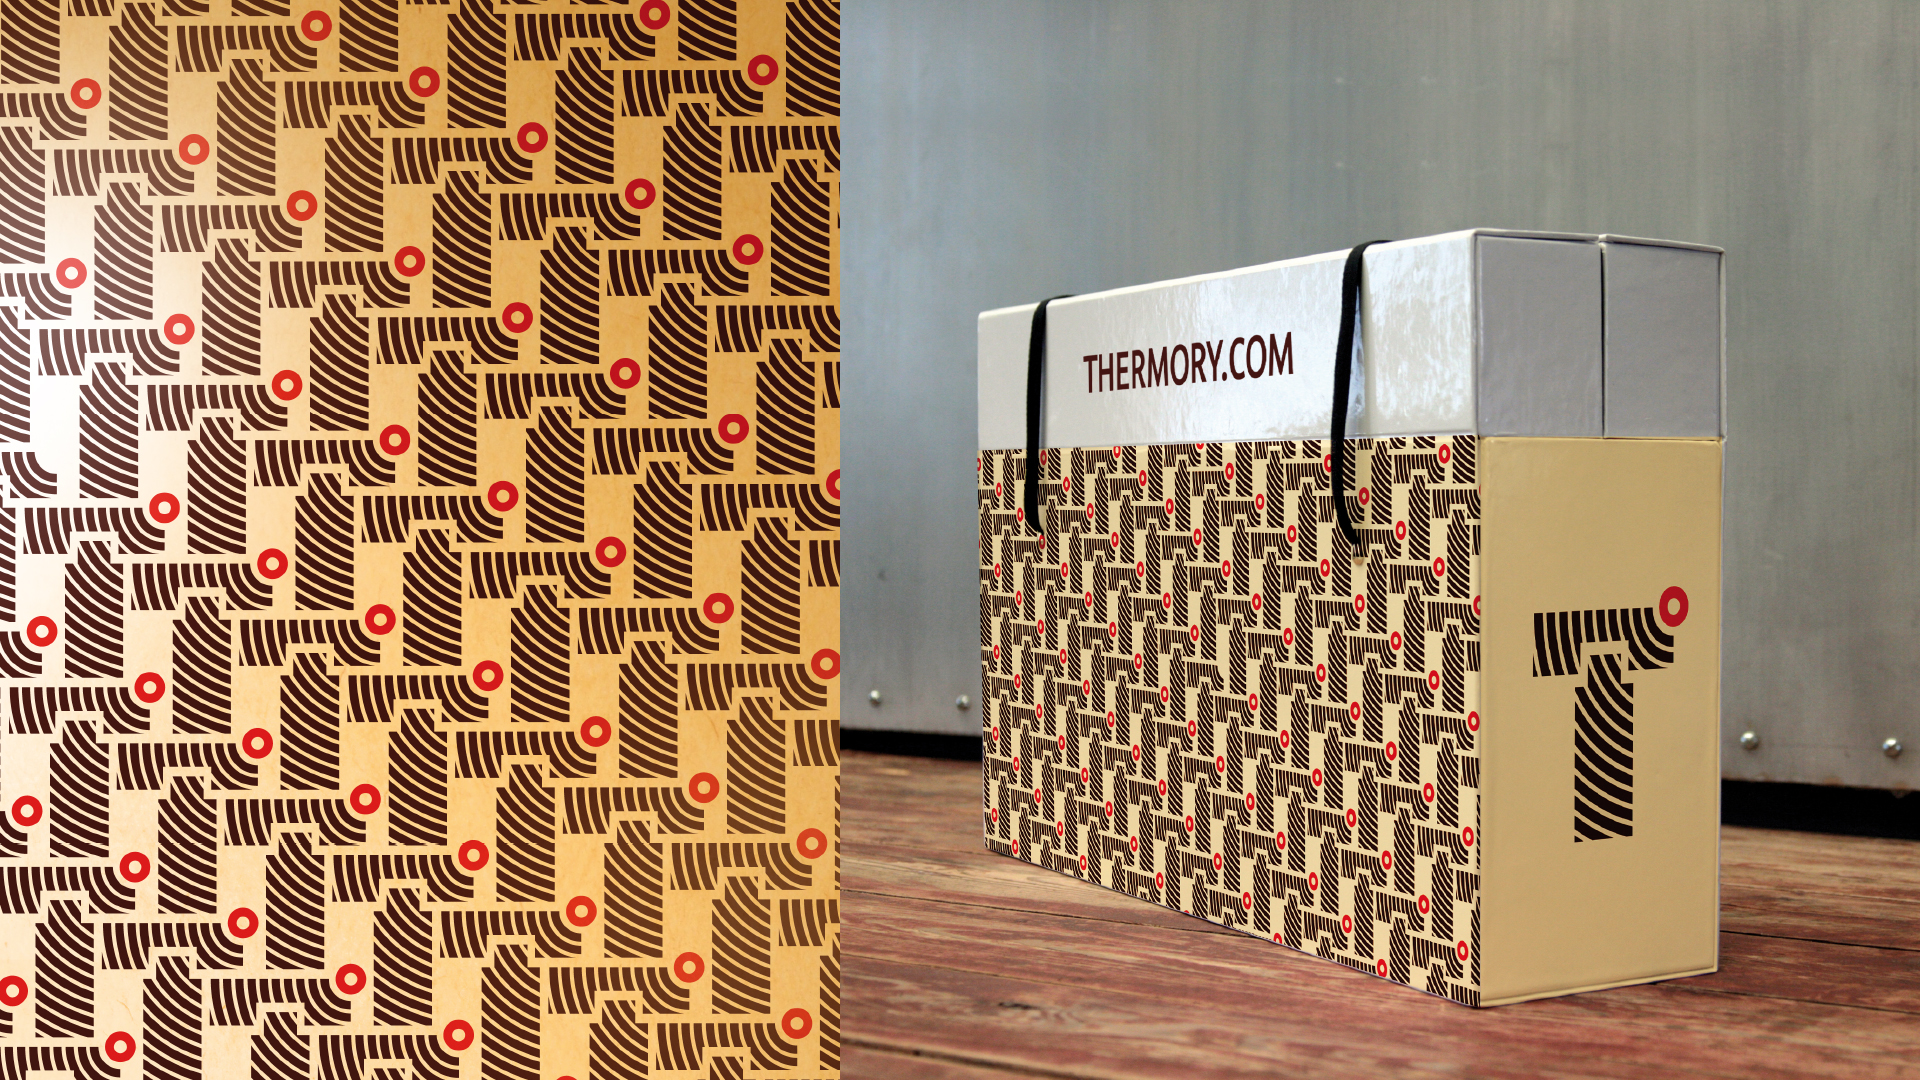 The aim for the Thermory project was to visualize and communicate the brand's unique and high quality wood products.